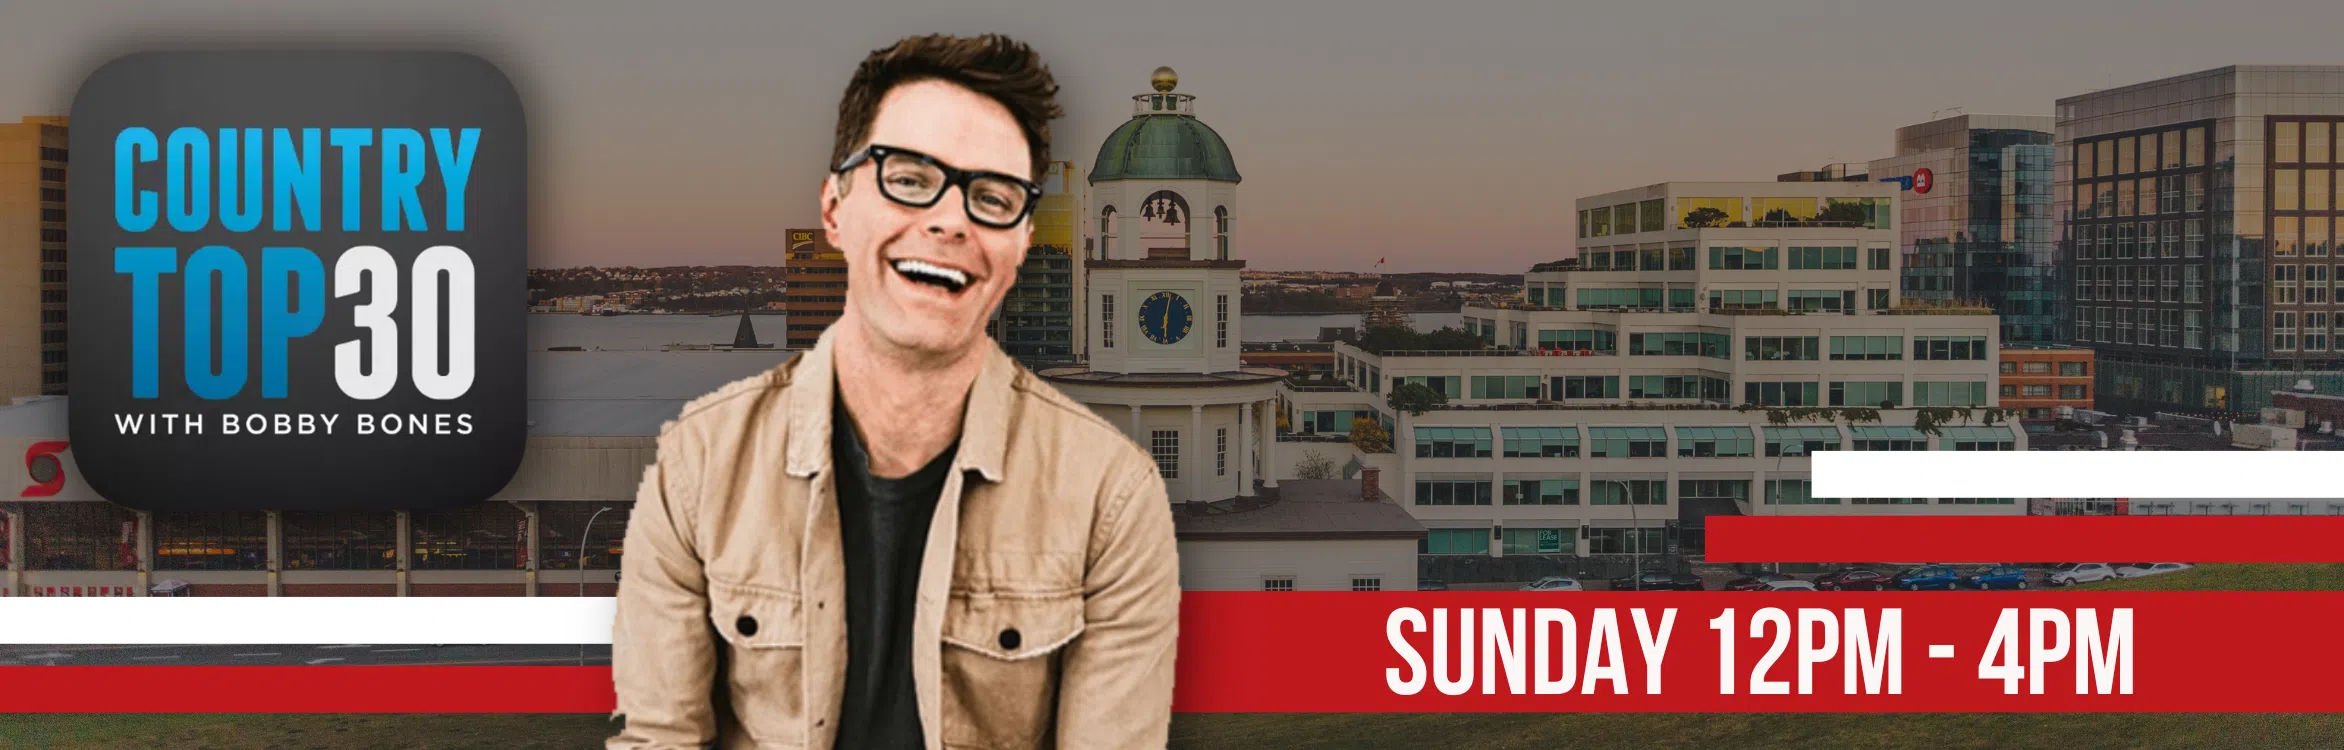 Feature: https://hotcountry1035.ca/the-country-top-30-with-bobby-bones/